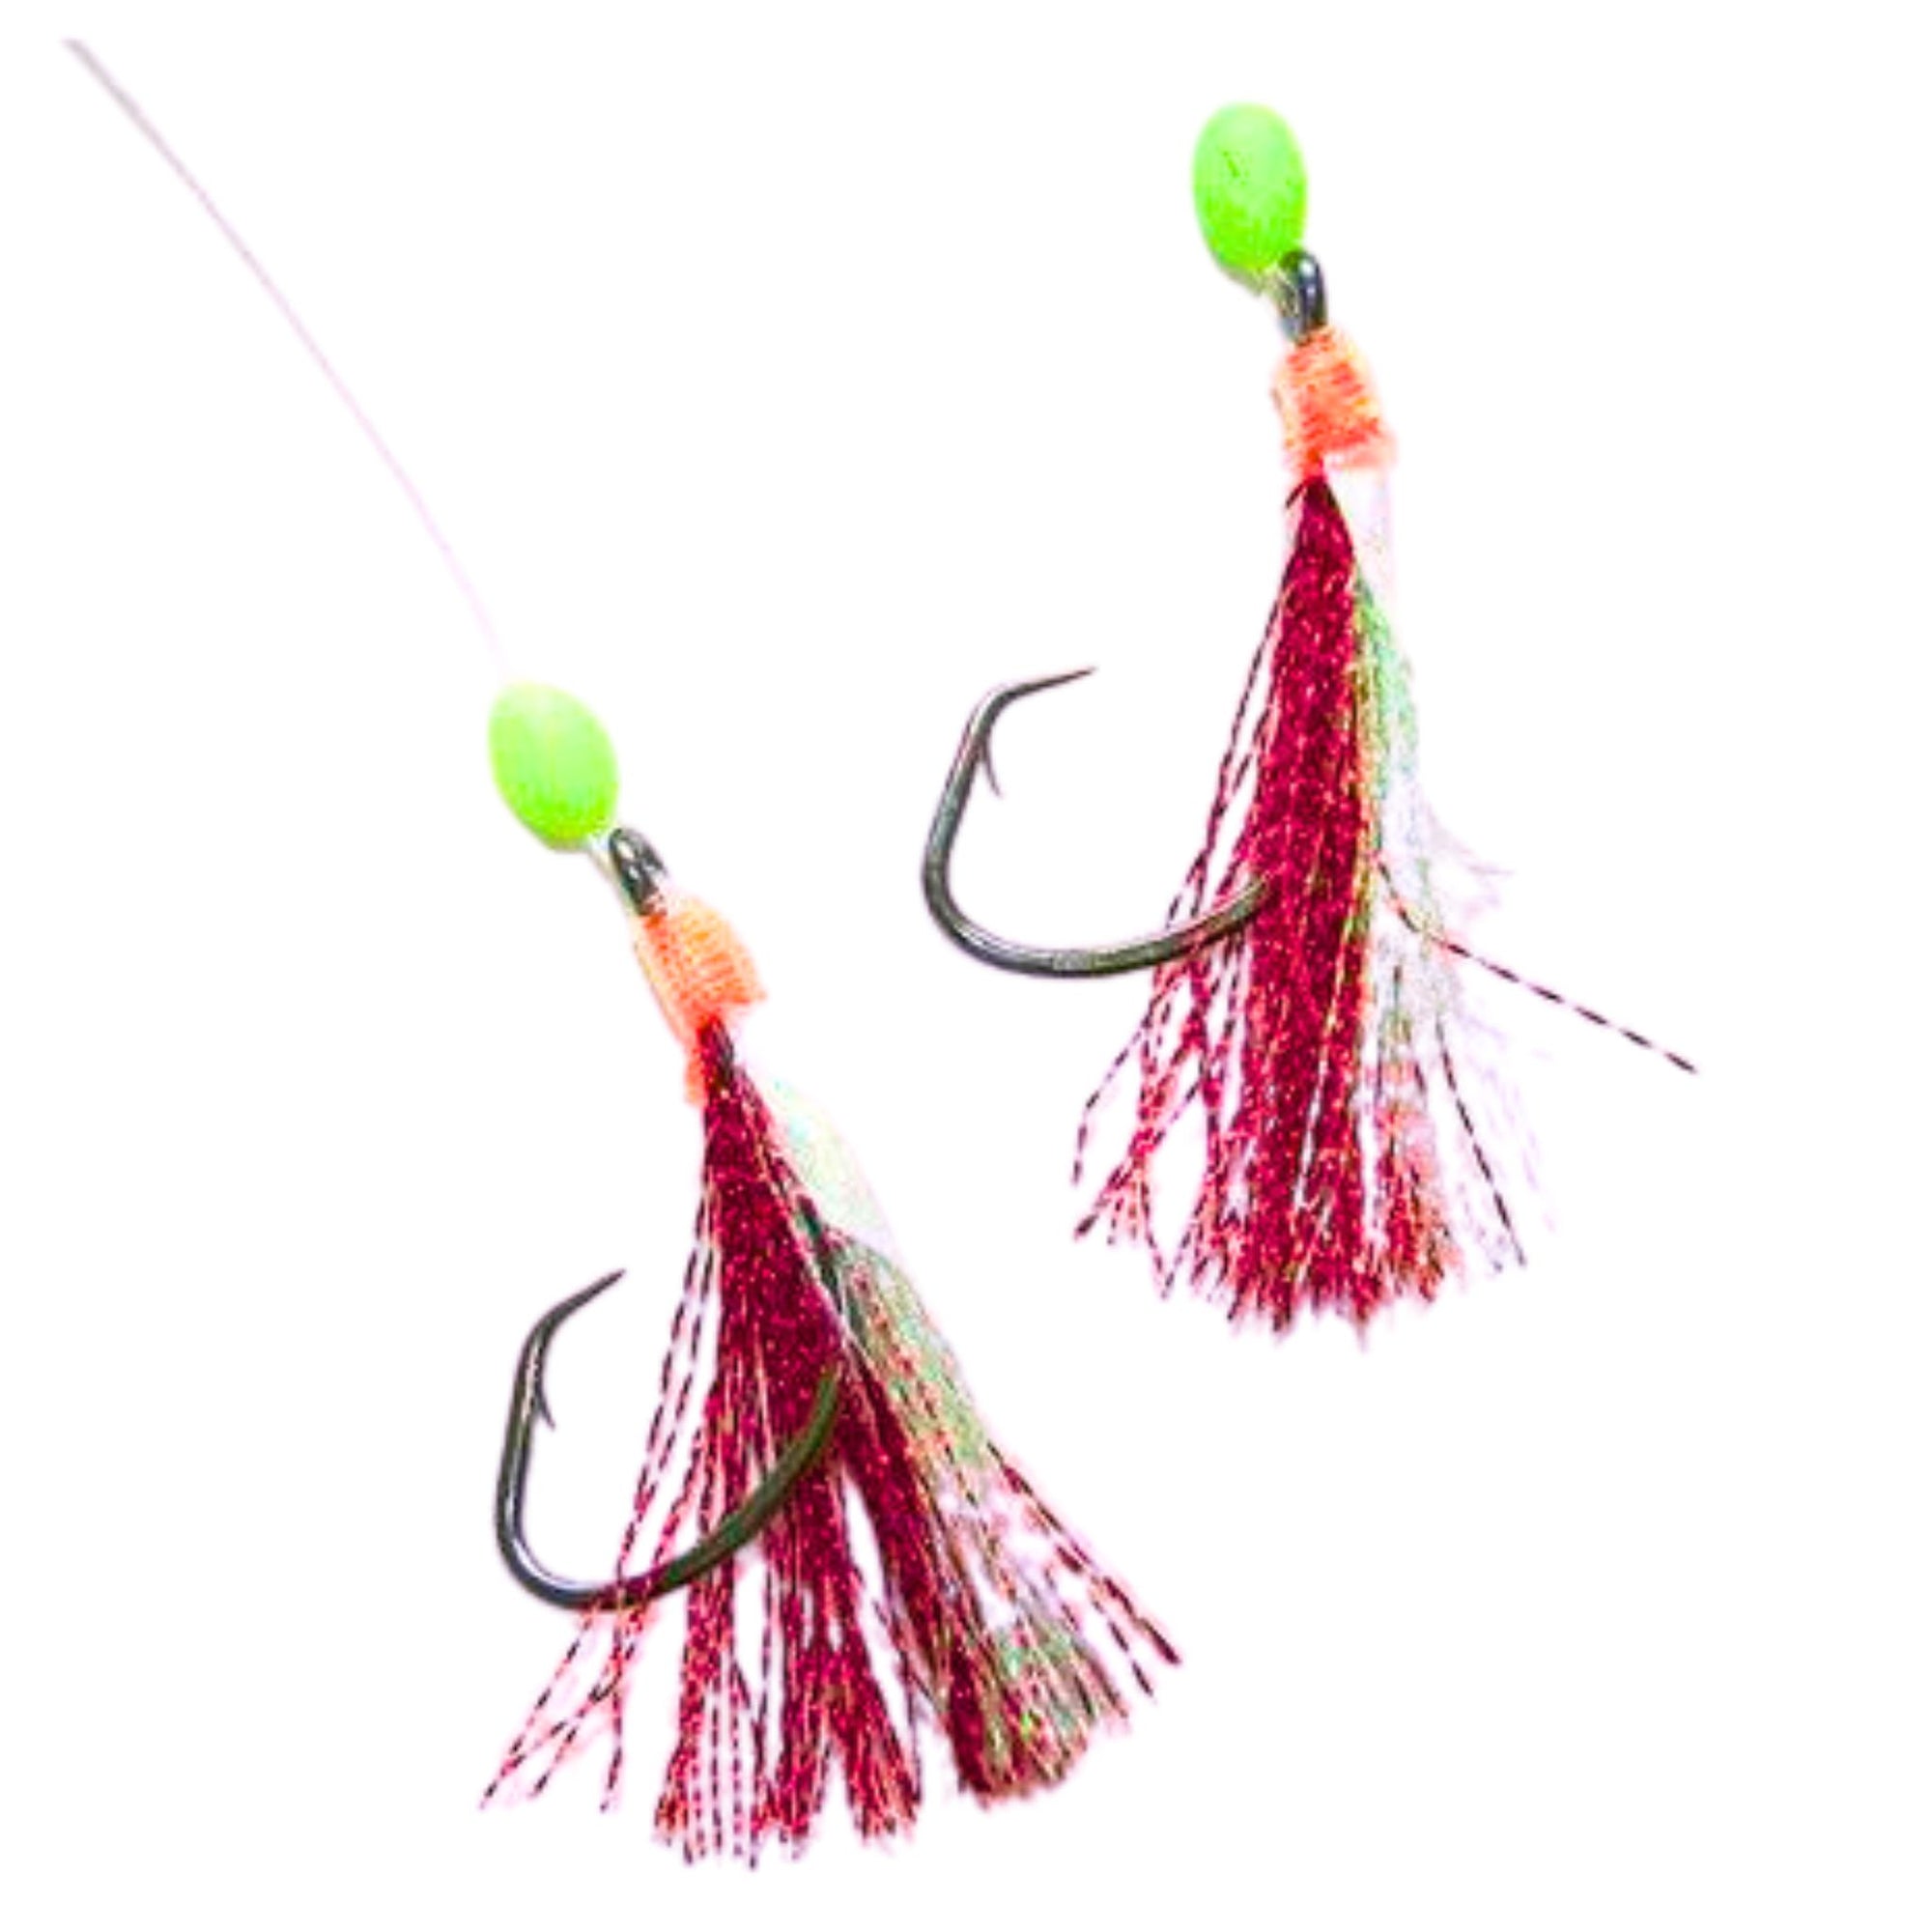 Snapper Mates Premade Paternoster Rig 5/0 Red/Chartreuse 2 Rigs - South East Clearance Centre